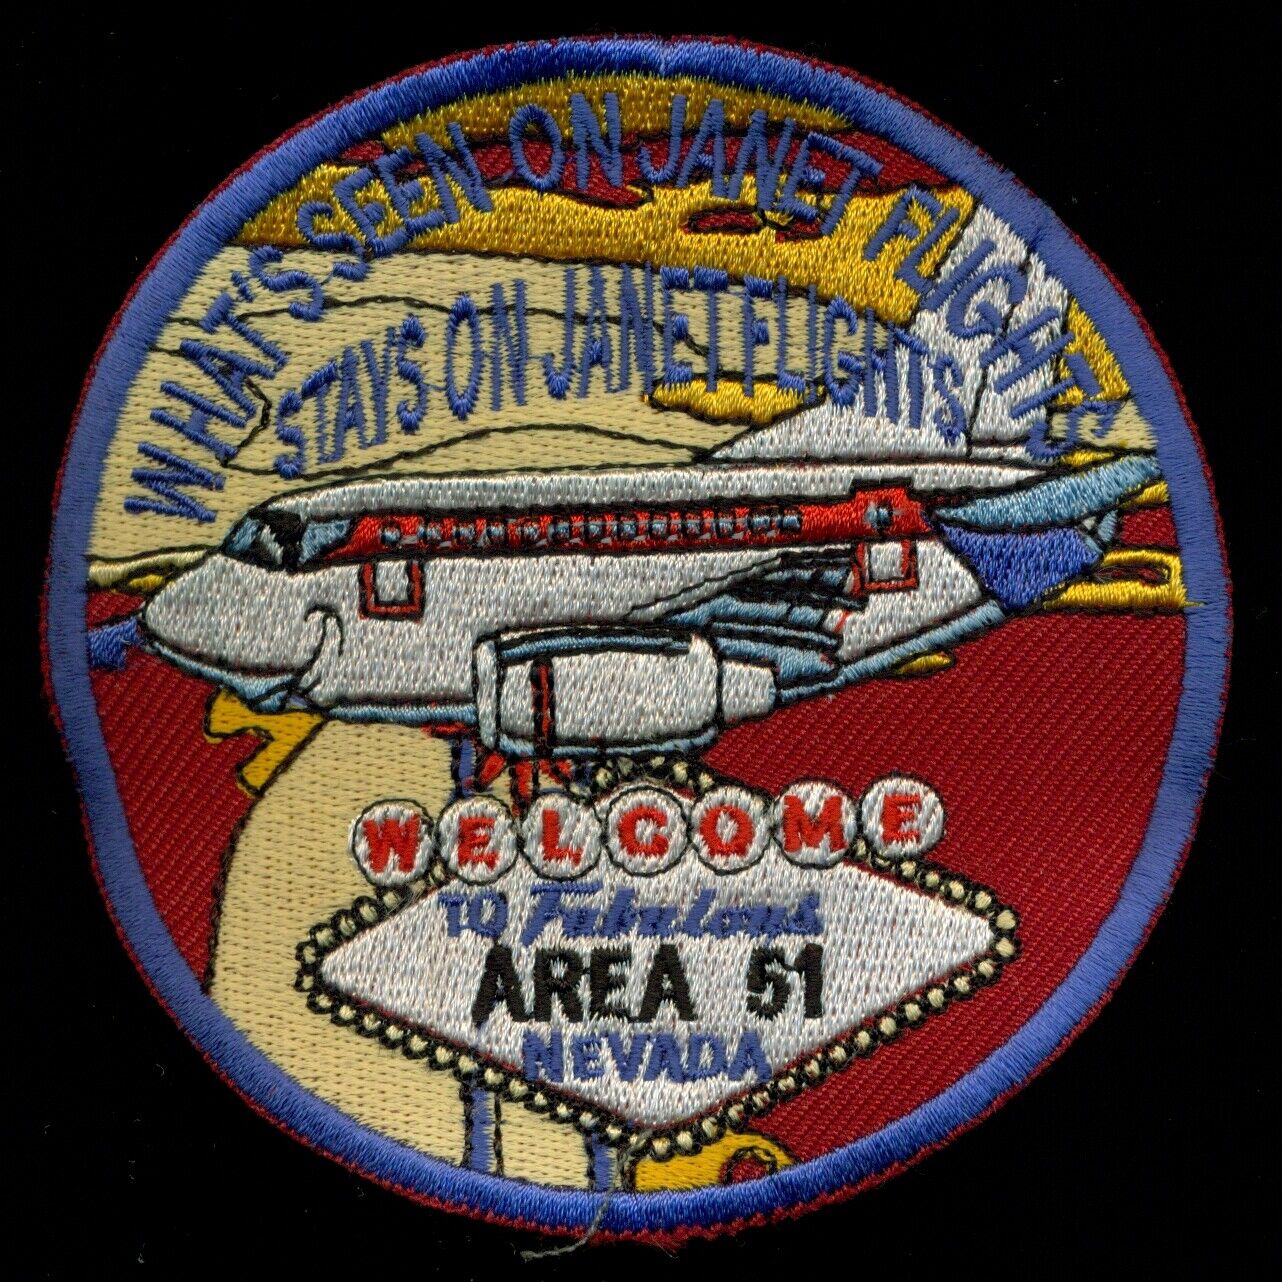 USAF Janet Air Airline Western Tonapah Test Range Area 51 Patch C4